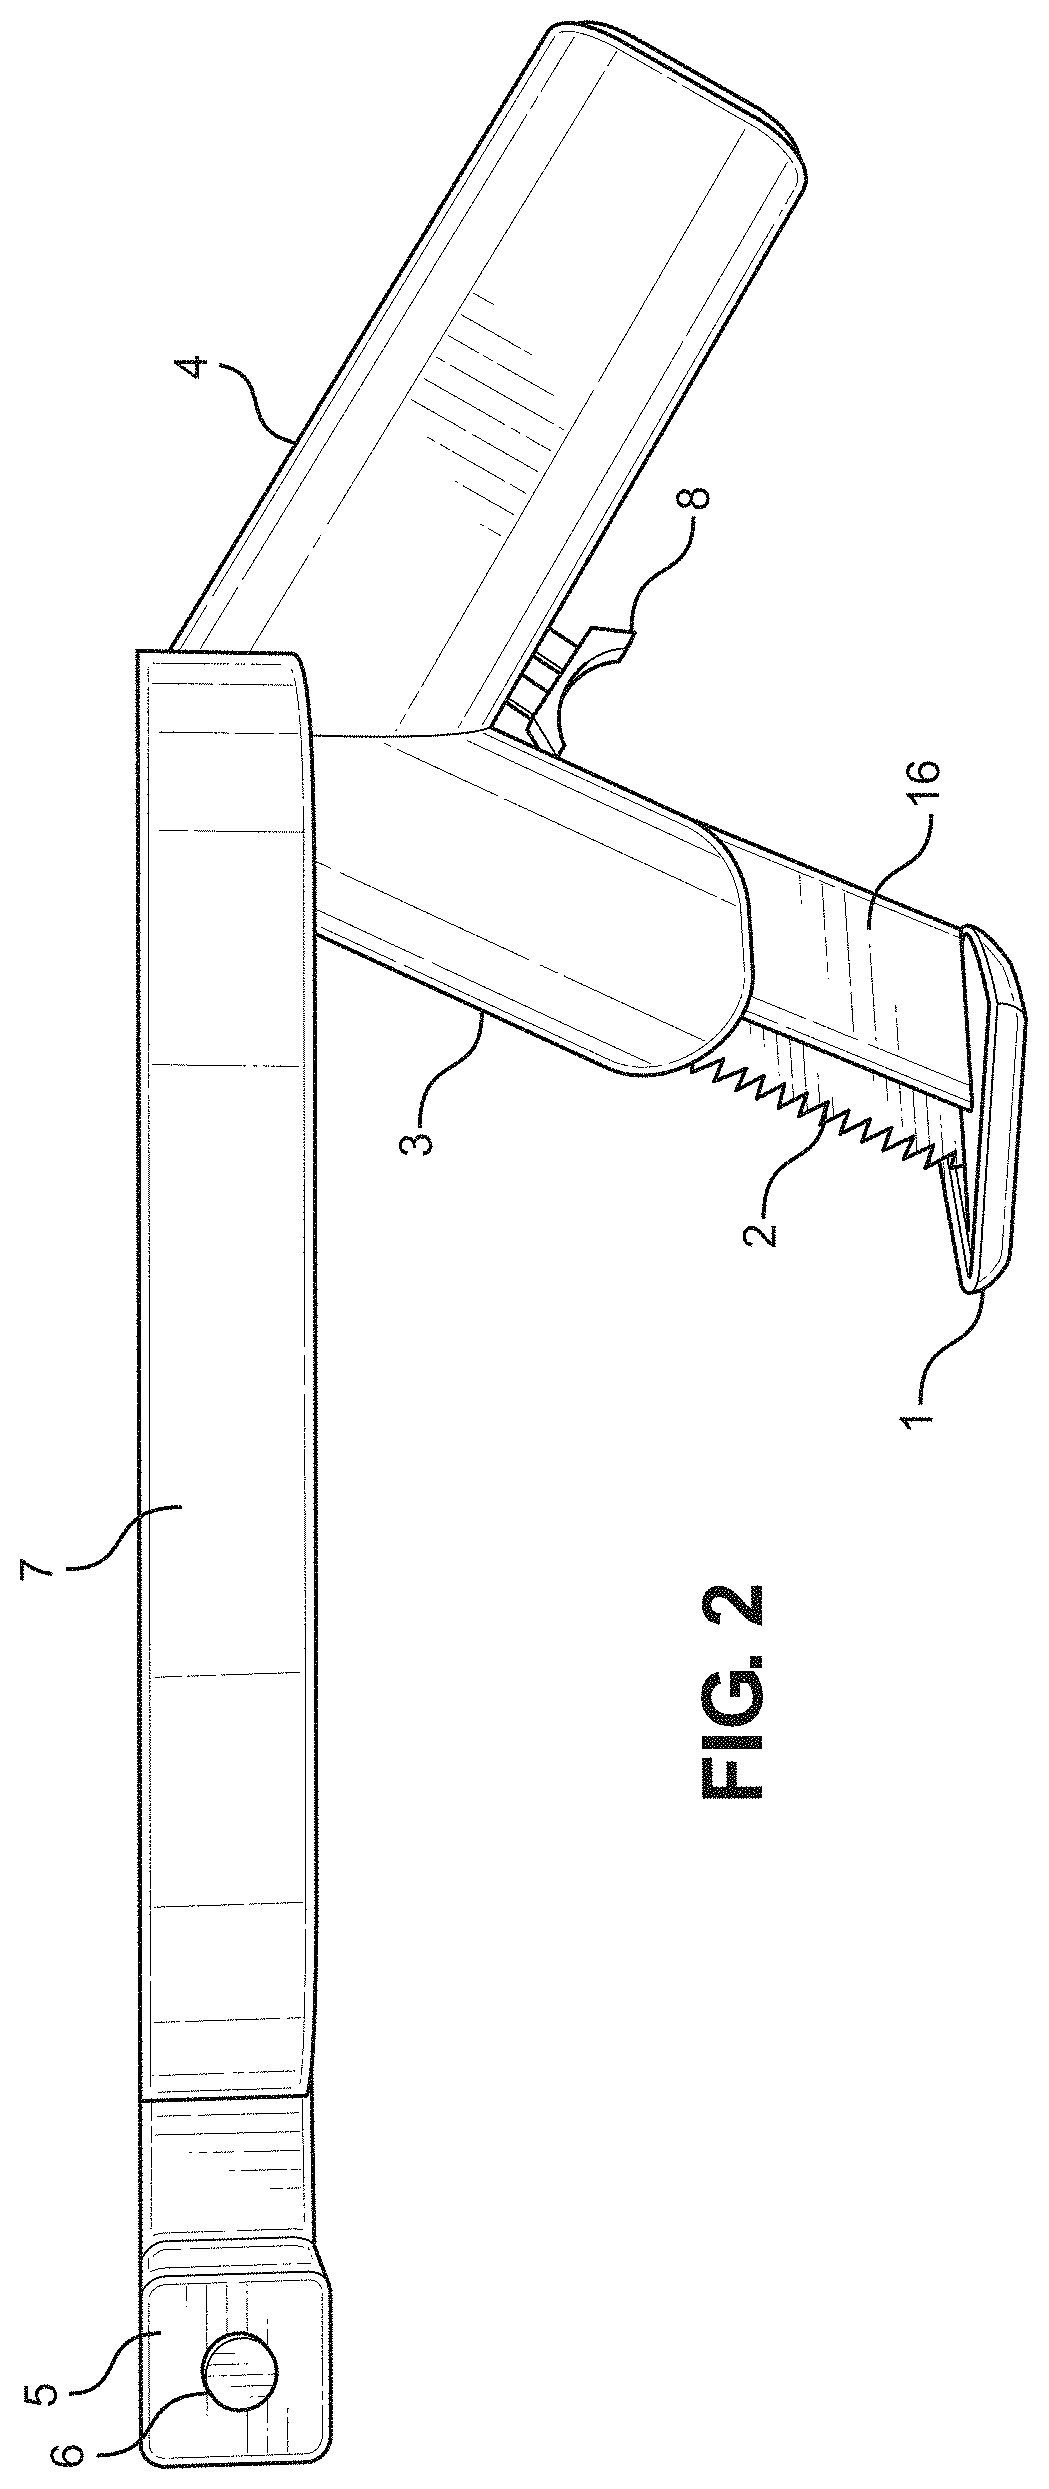 Device and method for performing sternotomy